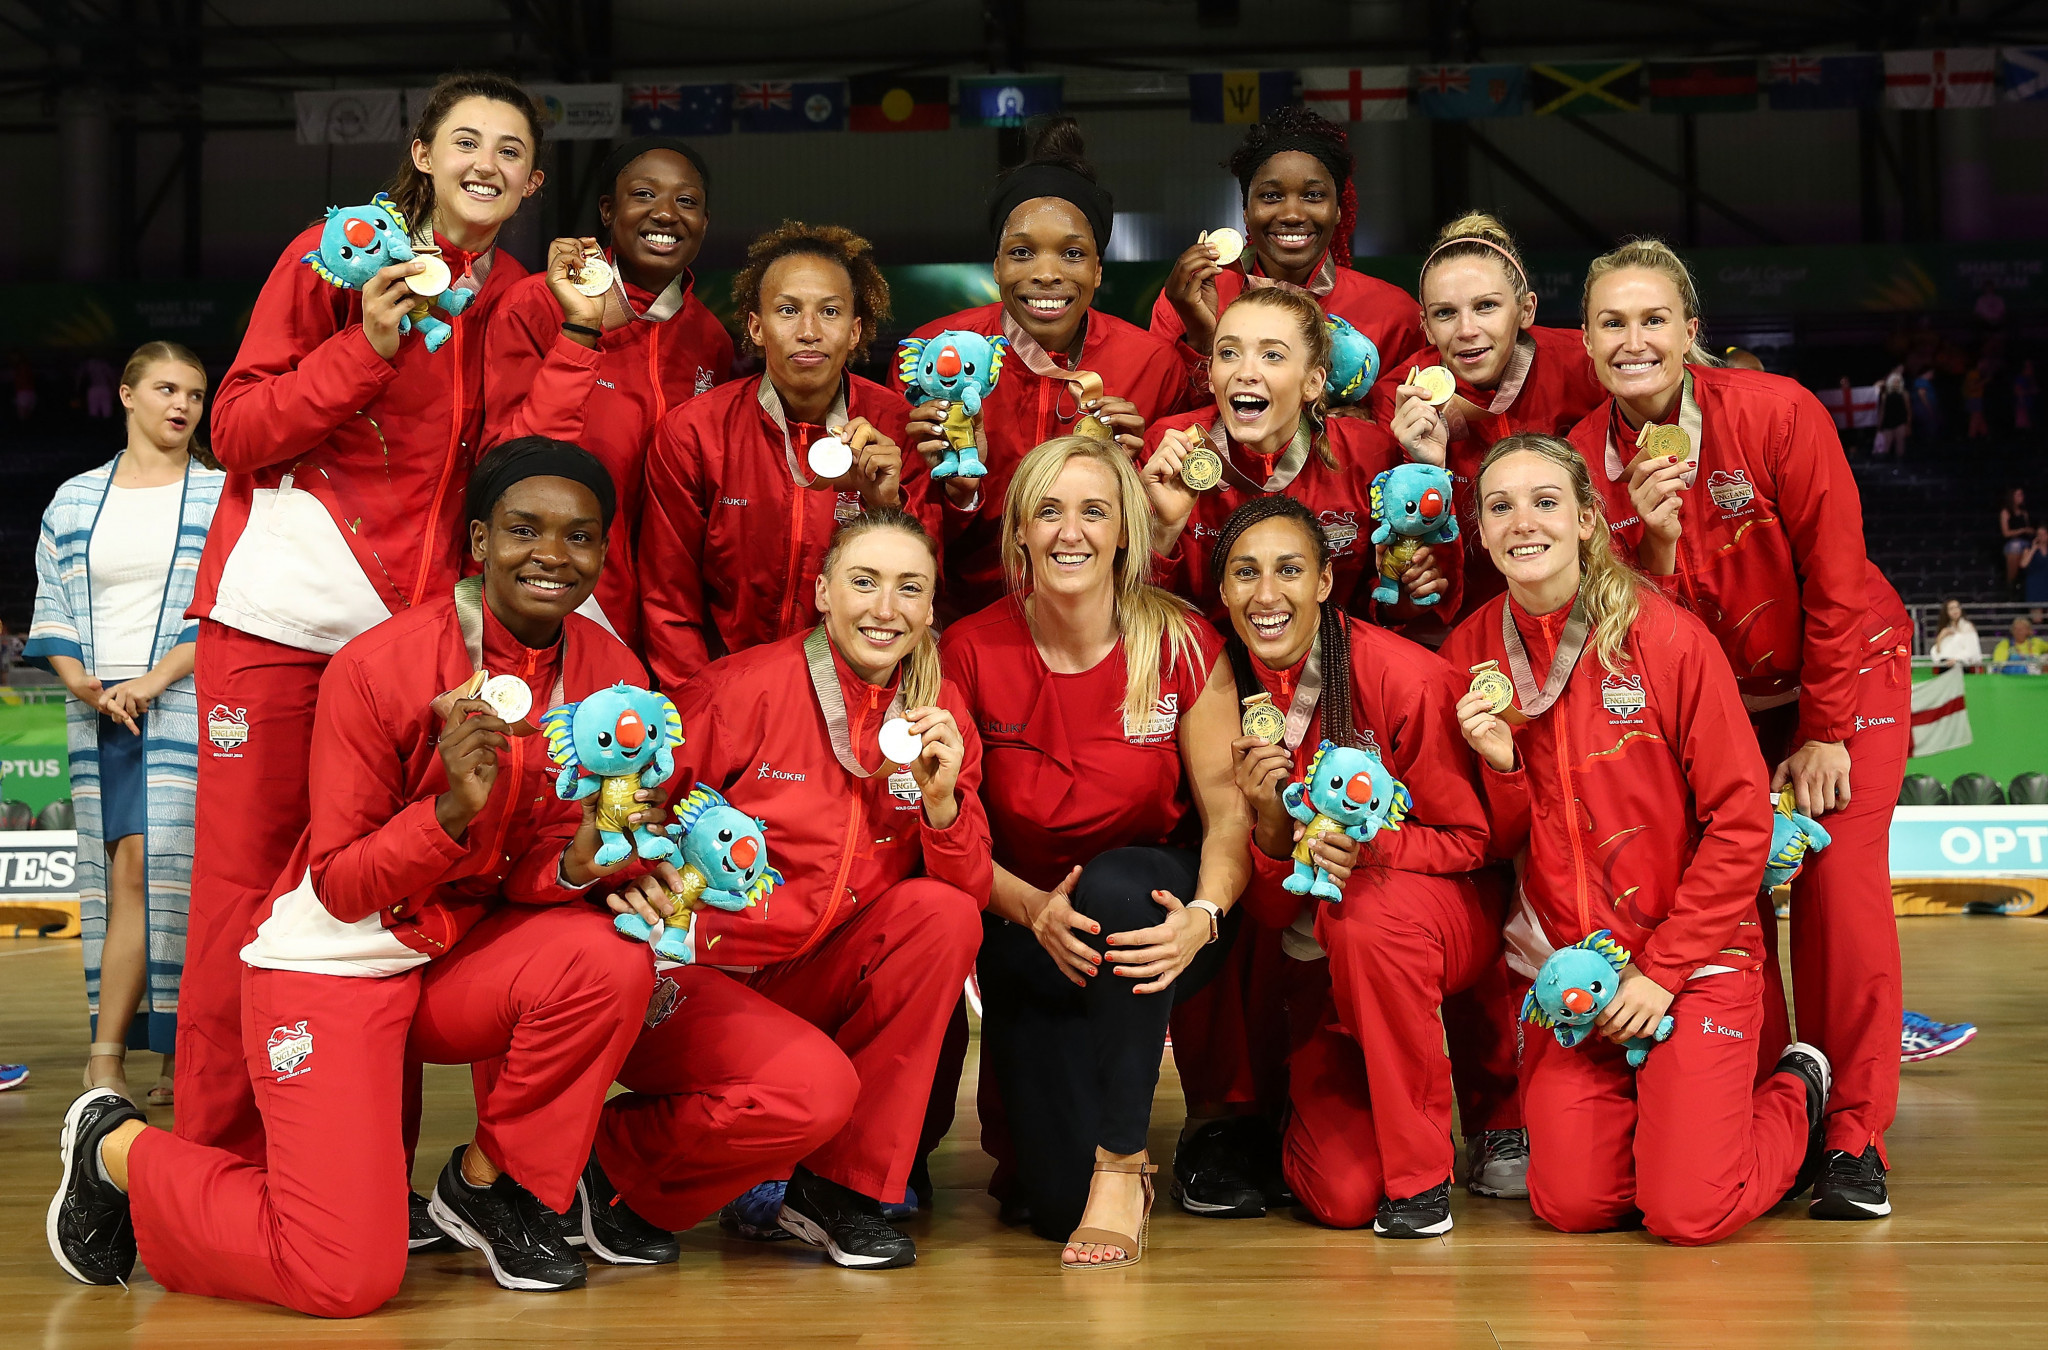 Hosts England are set to defend their Commonwealth Games netball title, having triumphed for the first time at Gold Coast 2018 ©Getty Images